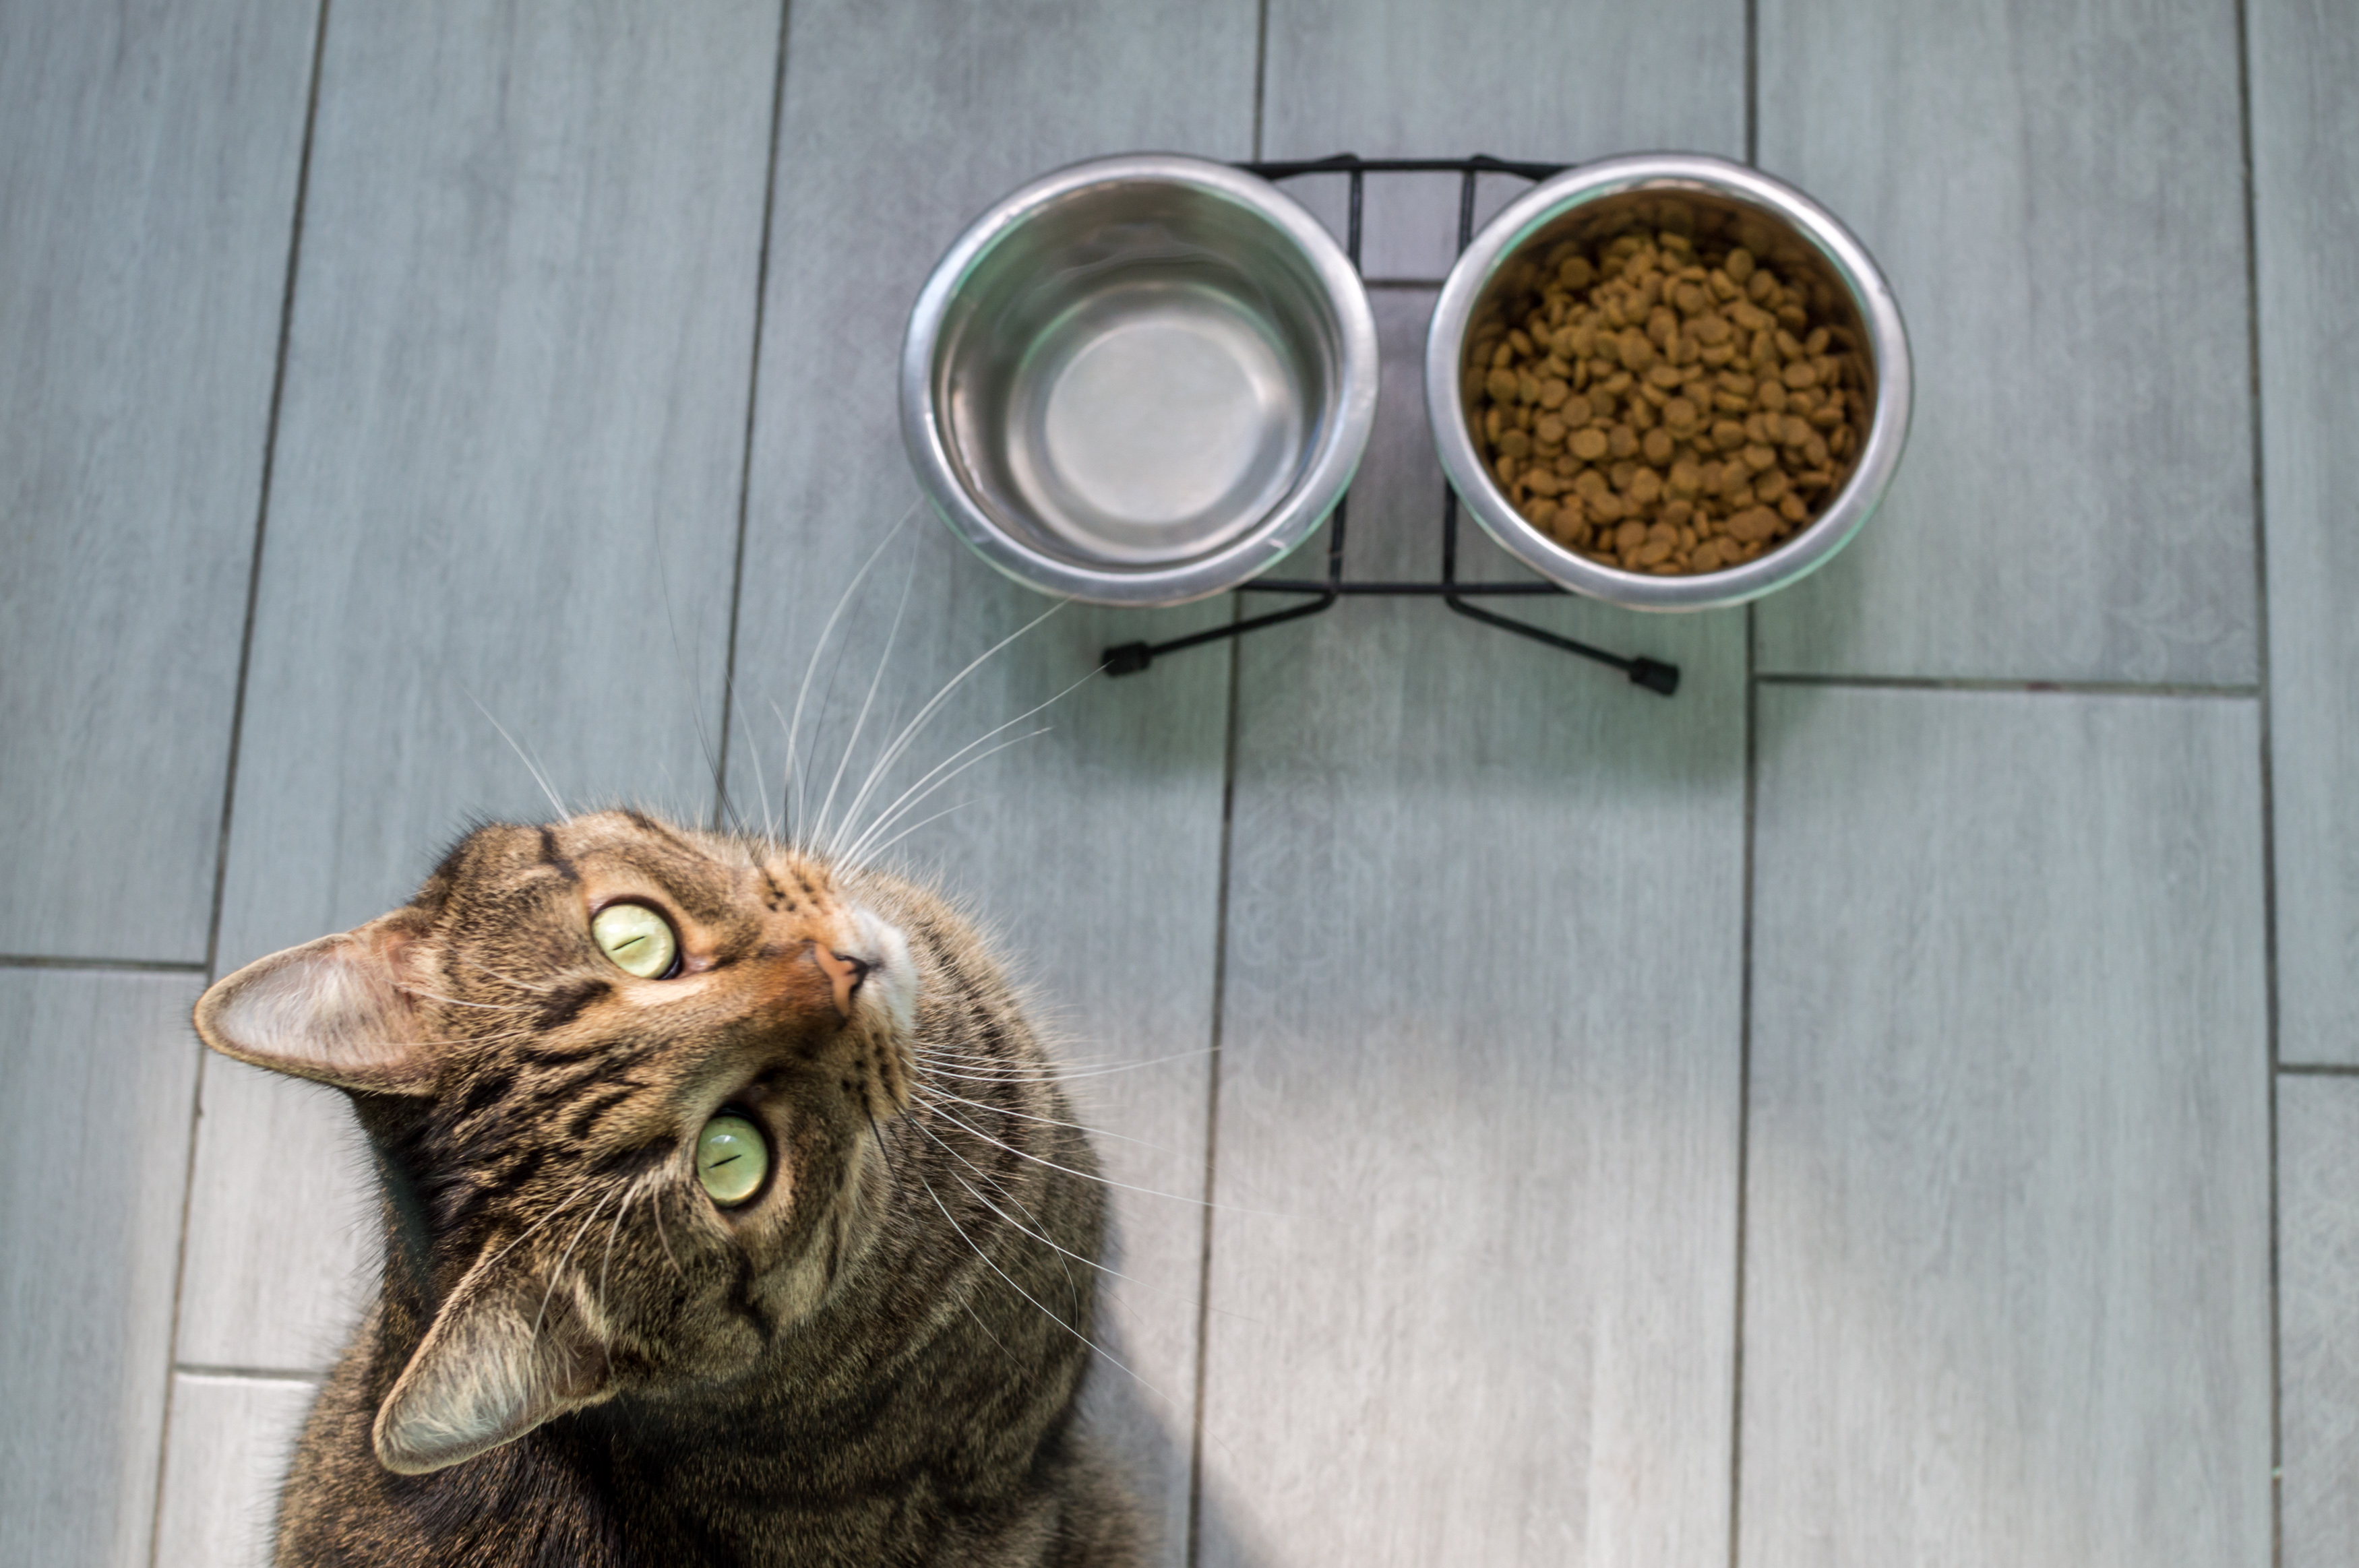 Should You Keep Your Cat's Water Bowl Away From Their Food?